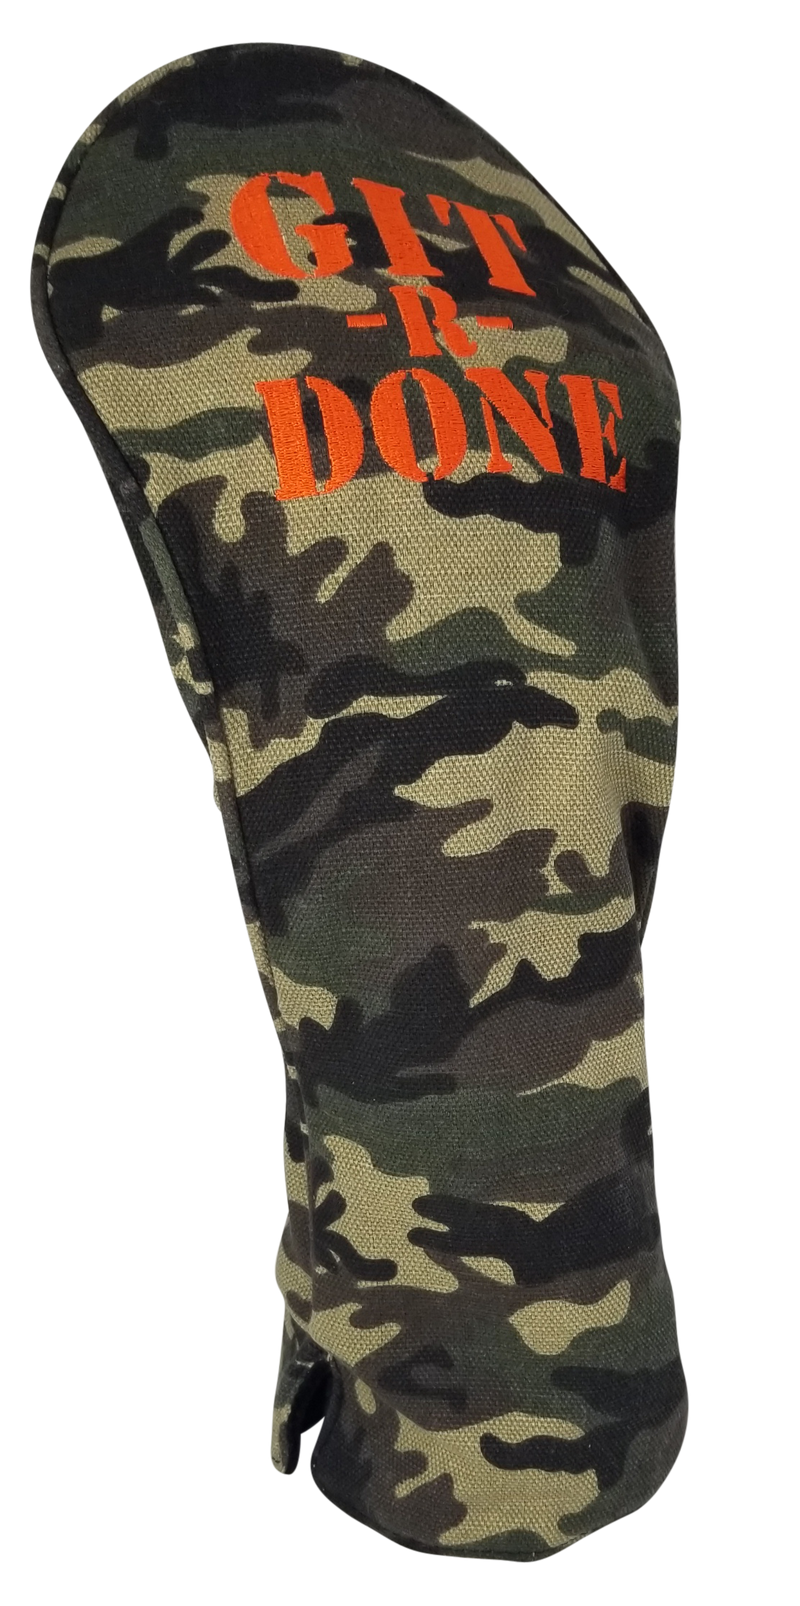 GIT-R-DONE Camo Embroidered Driver Headcover by ReadyGOLF